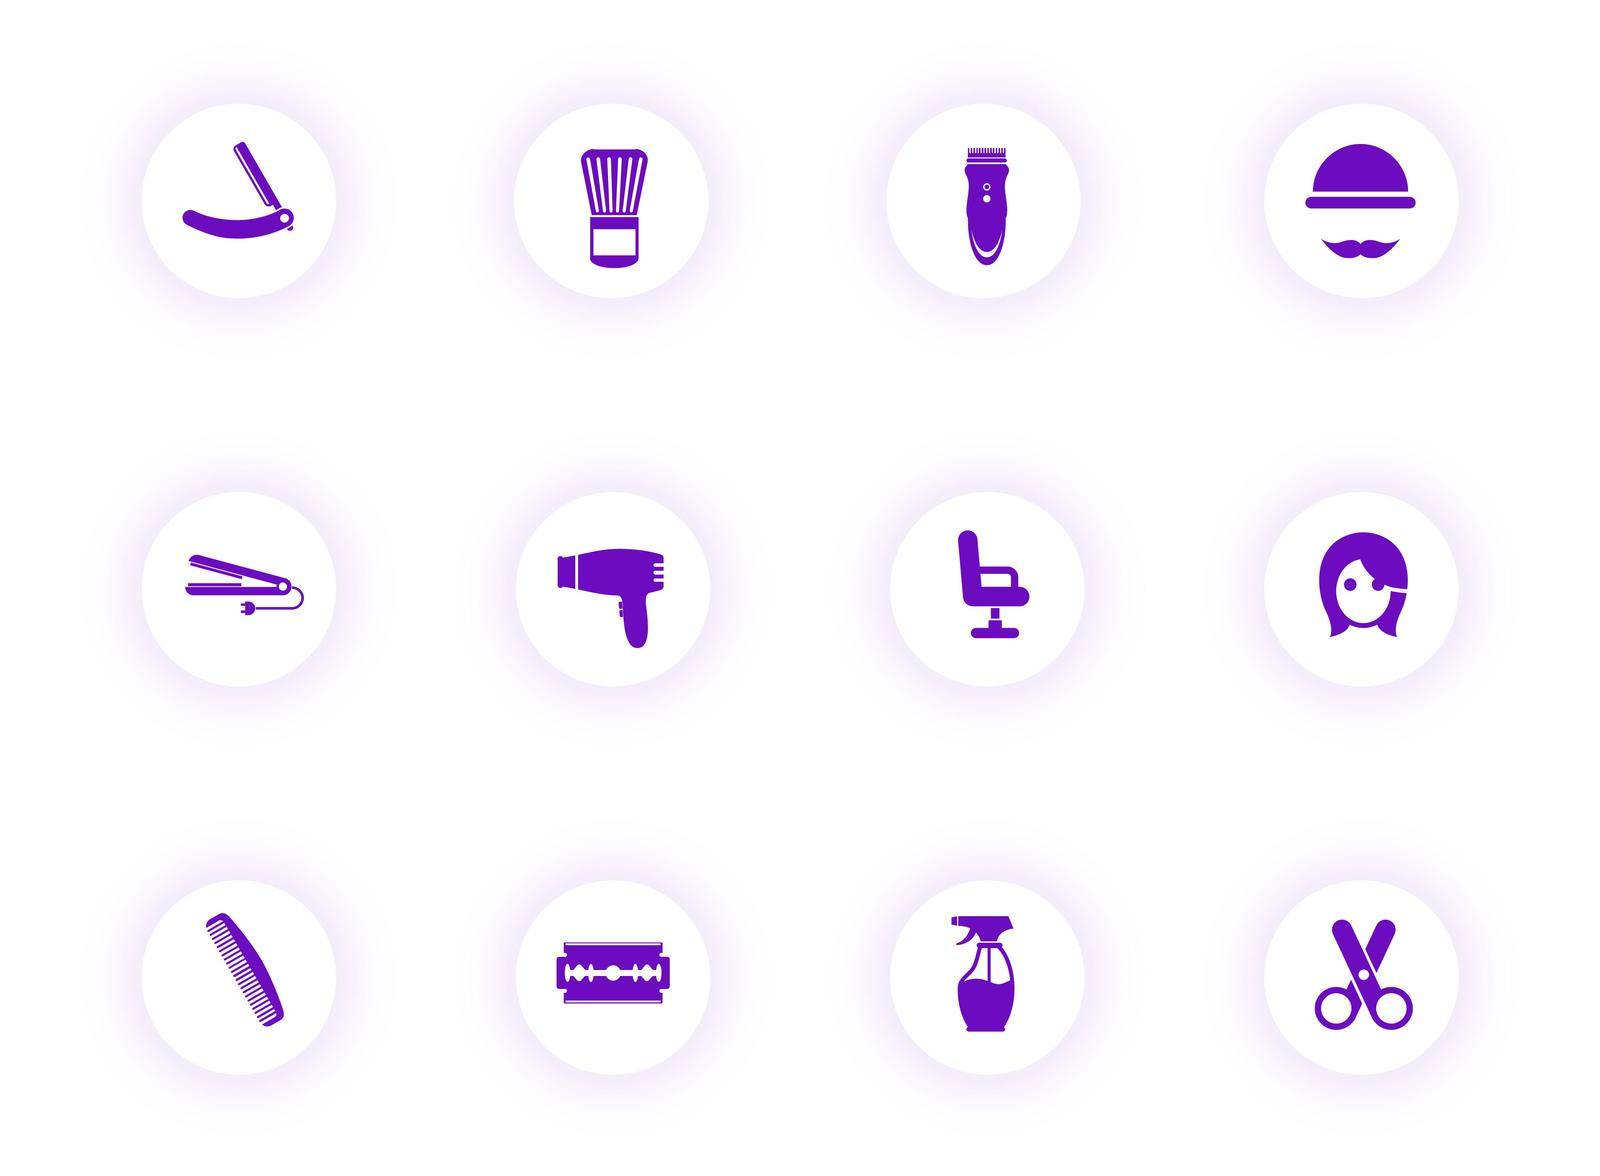 barber shop purple color vector icons on light round buttons with purple shadow. barber shop icon set for web, mobile apps, ui design and print by govindamadhava108